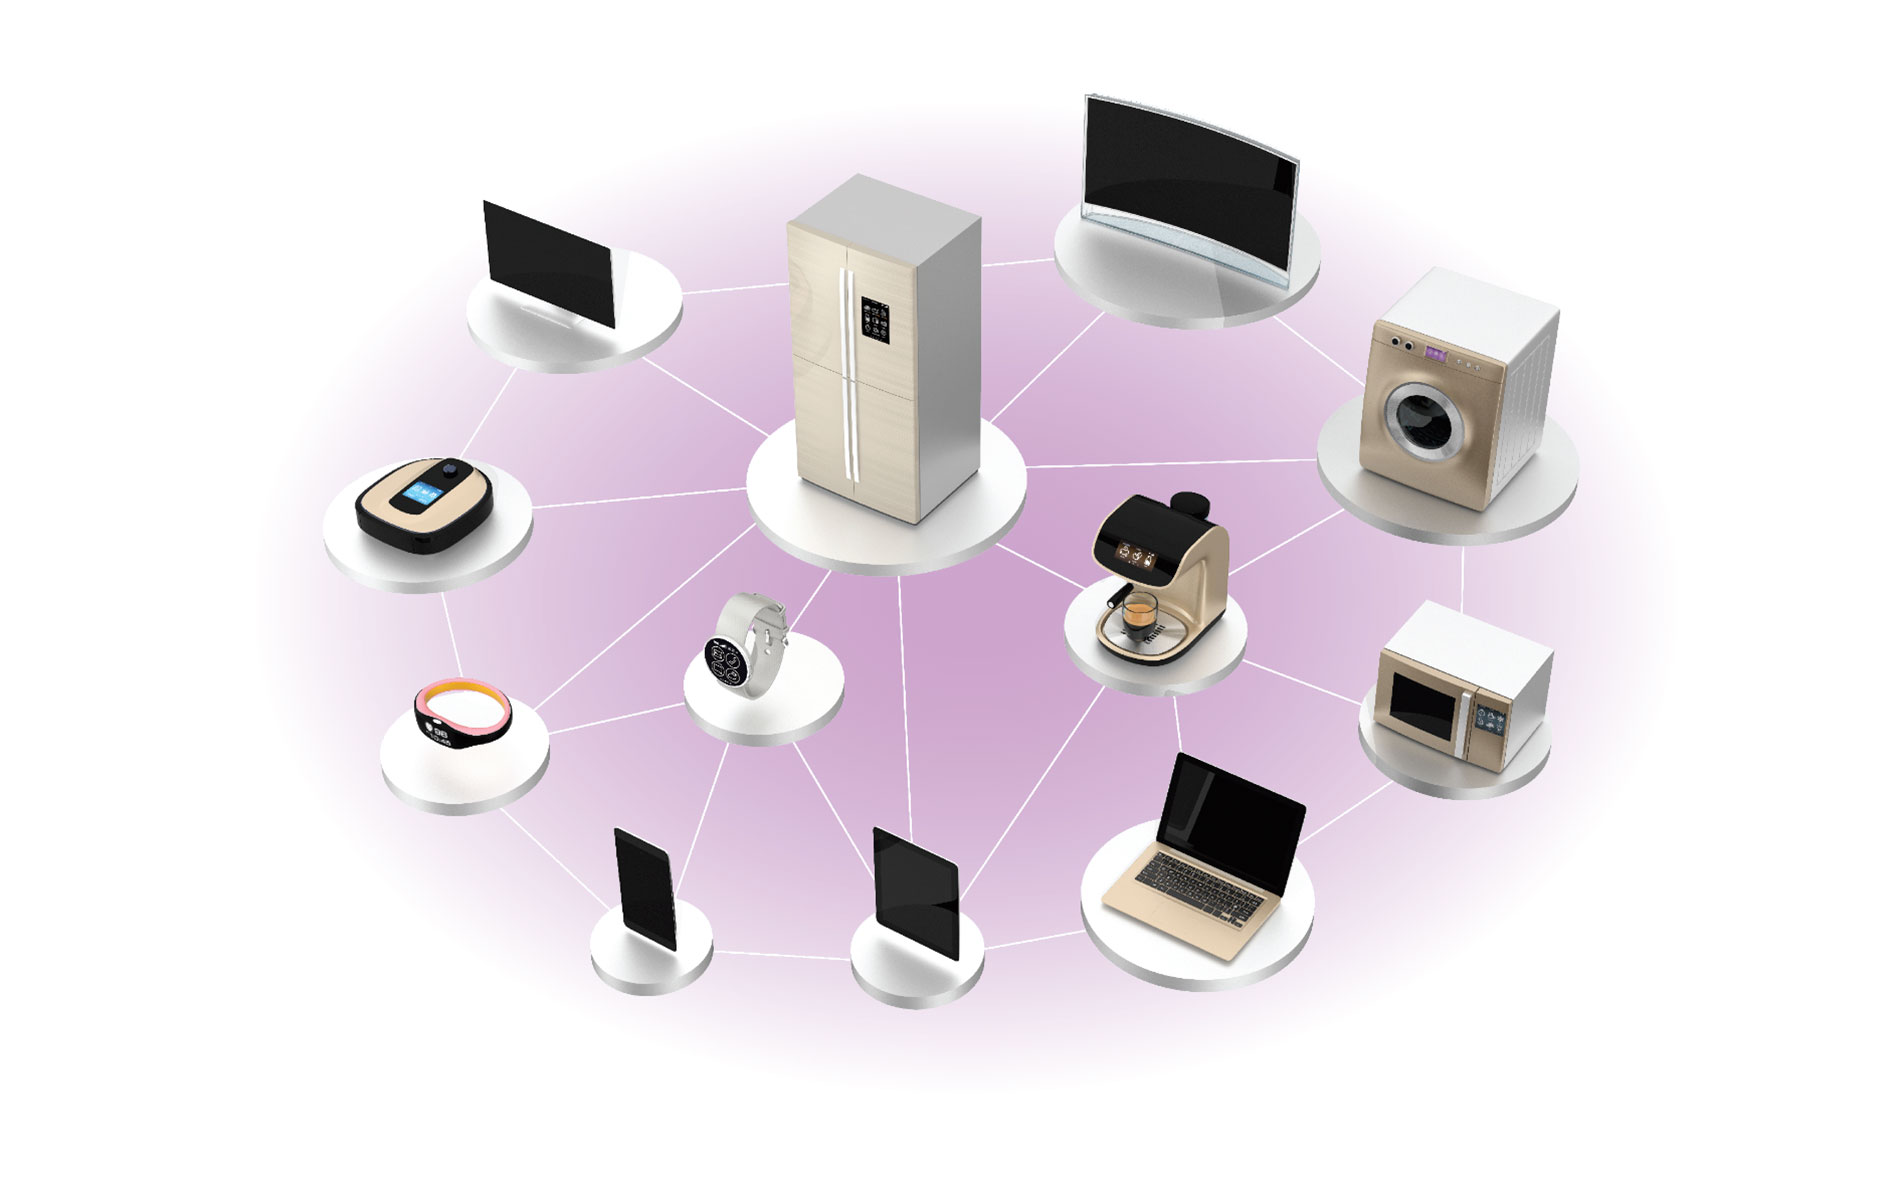 Illustration of an assortment of appliances connected by lines. Image by Shutterstock / Chesky.